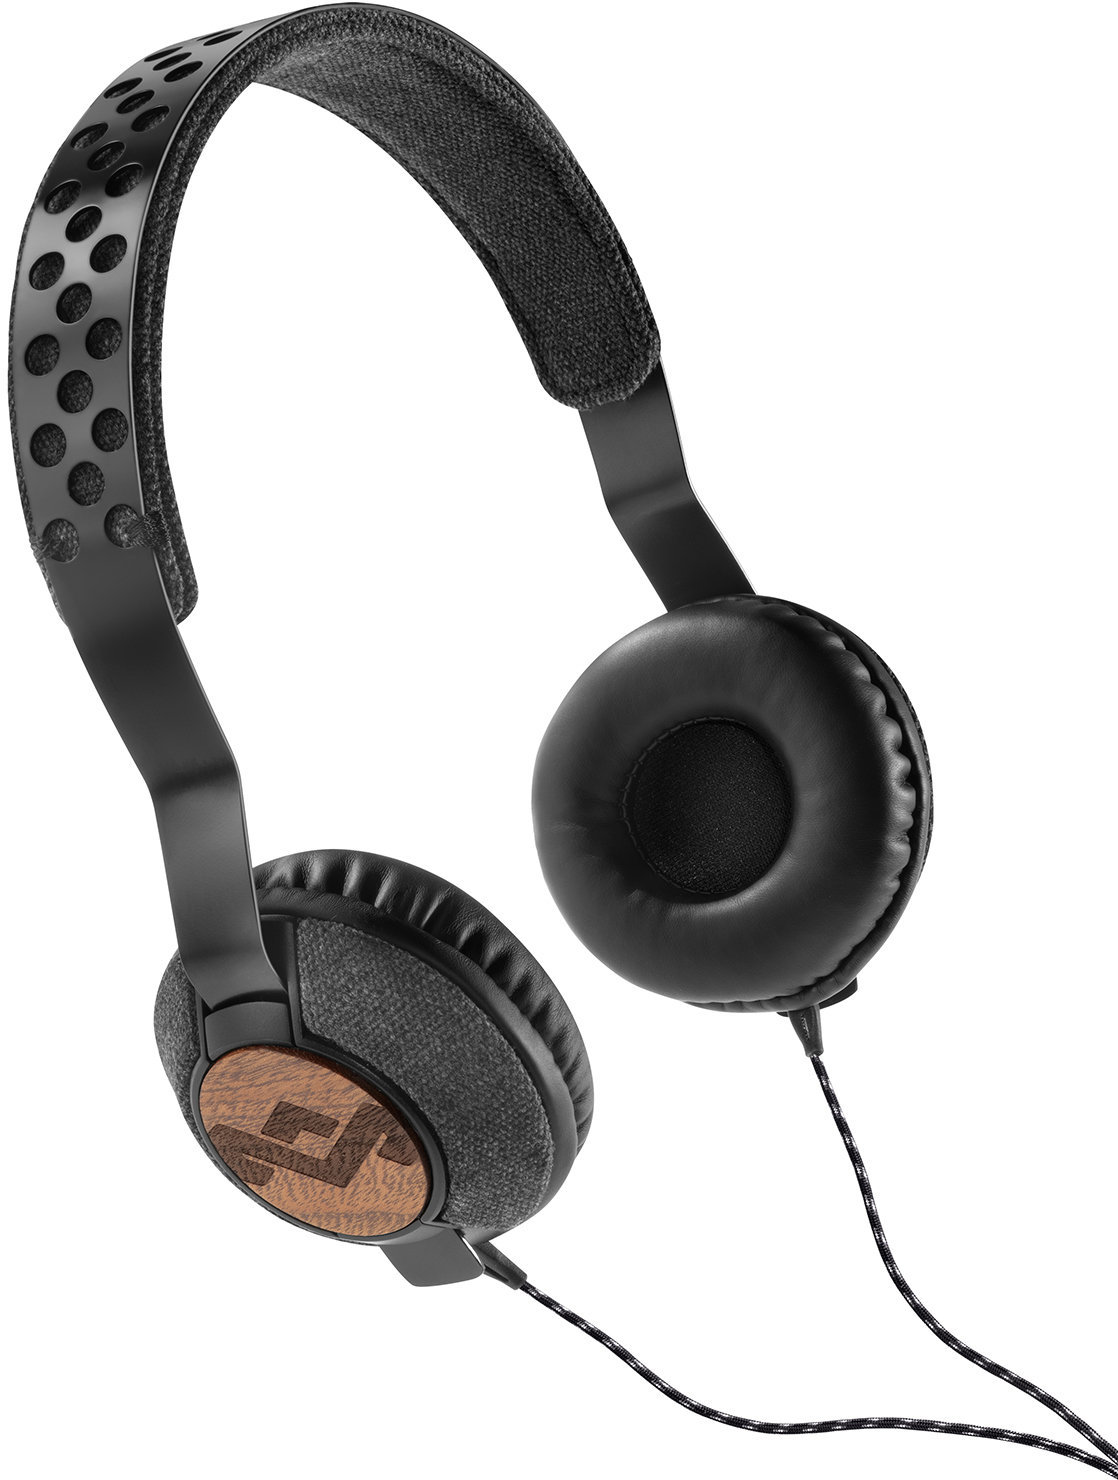 Combiné micro-casque de diffusion House of Marley Liberate Midnight with Mic